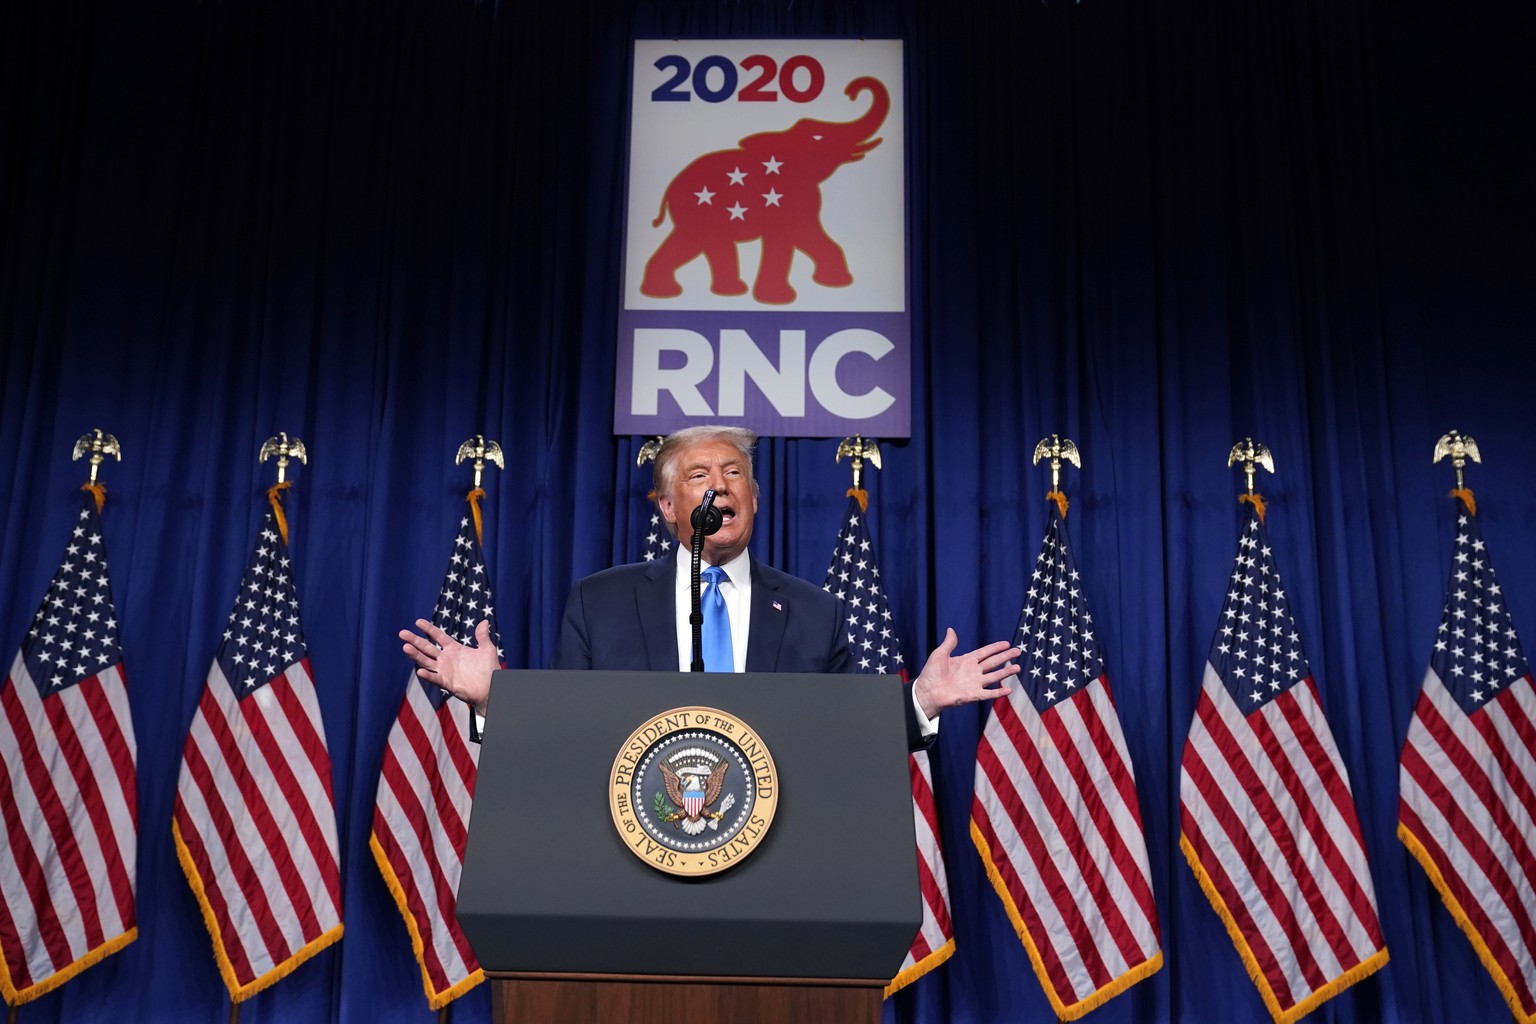 President Donald Trump speaks on stage during the first day of the Republican National Committee convention, Monday, Aug. 24, 2020, in Charlotte. (AP Photo/Evan Vucci)
Donald Trump